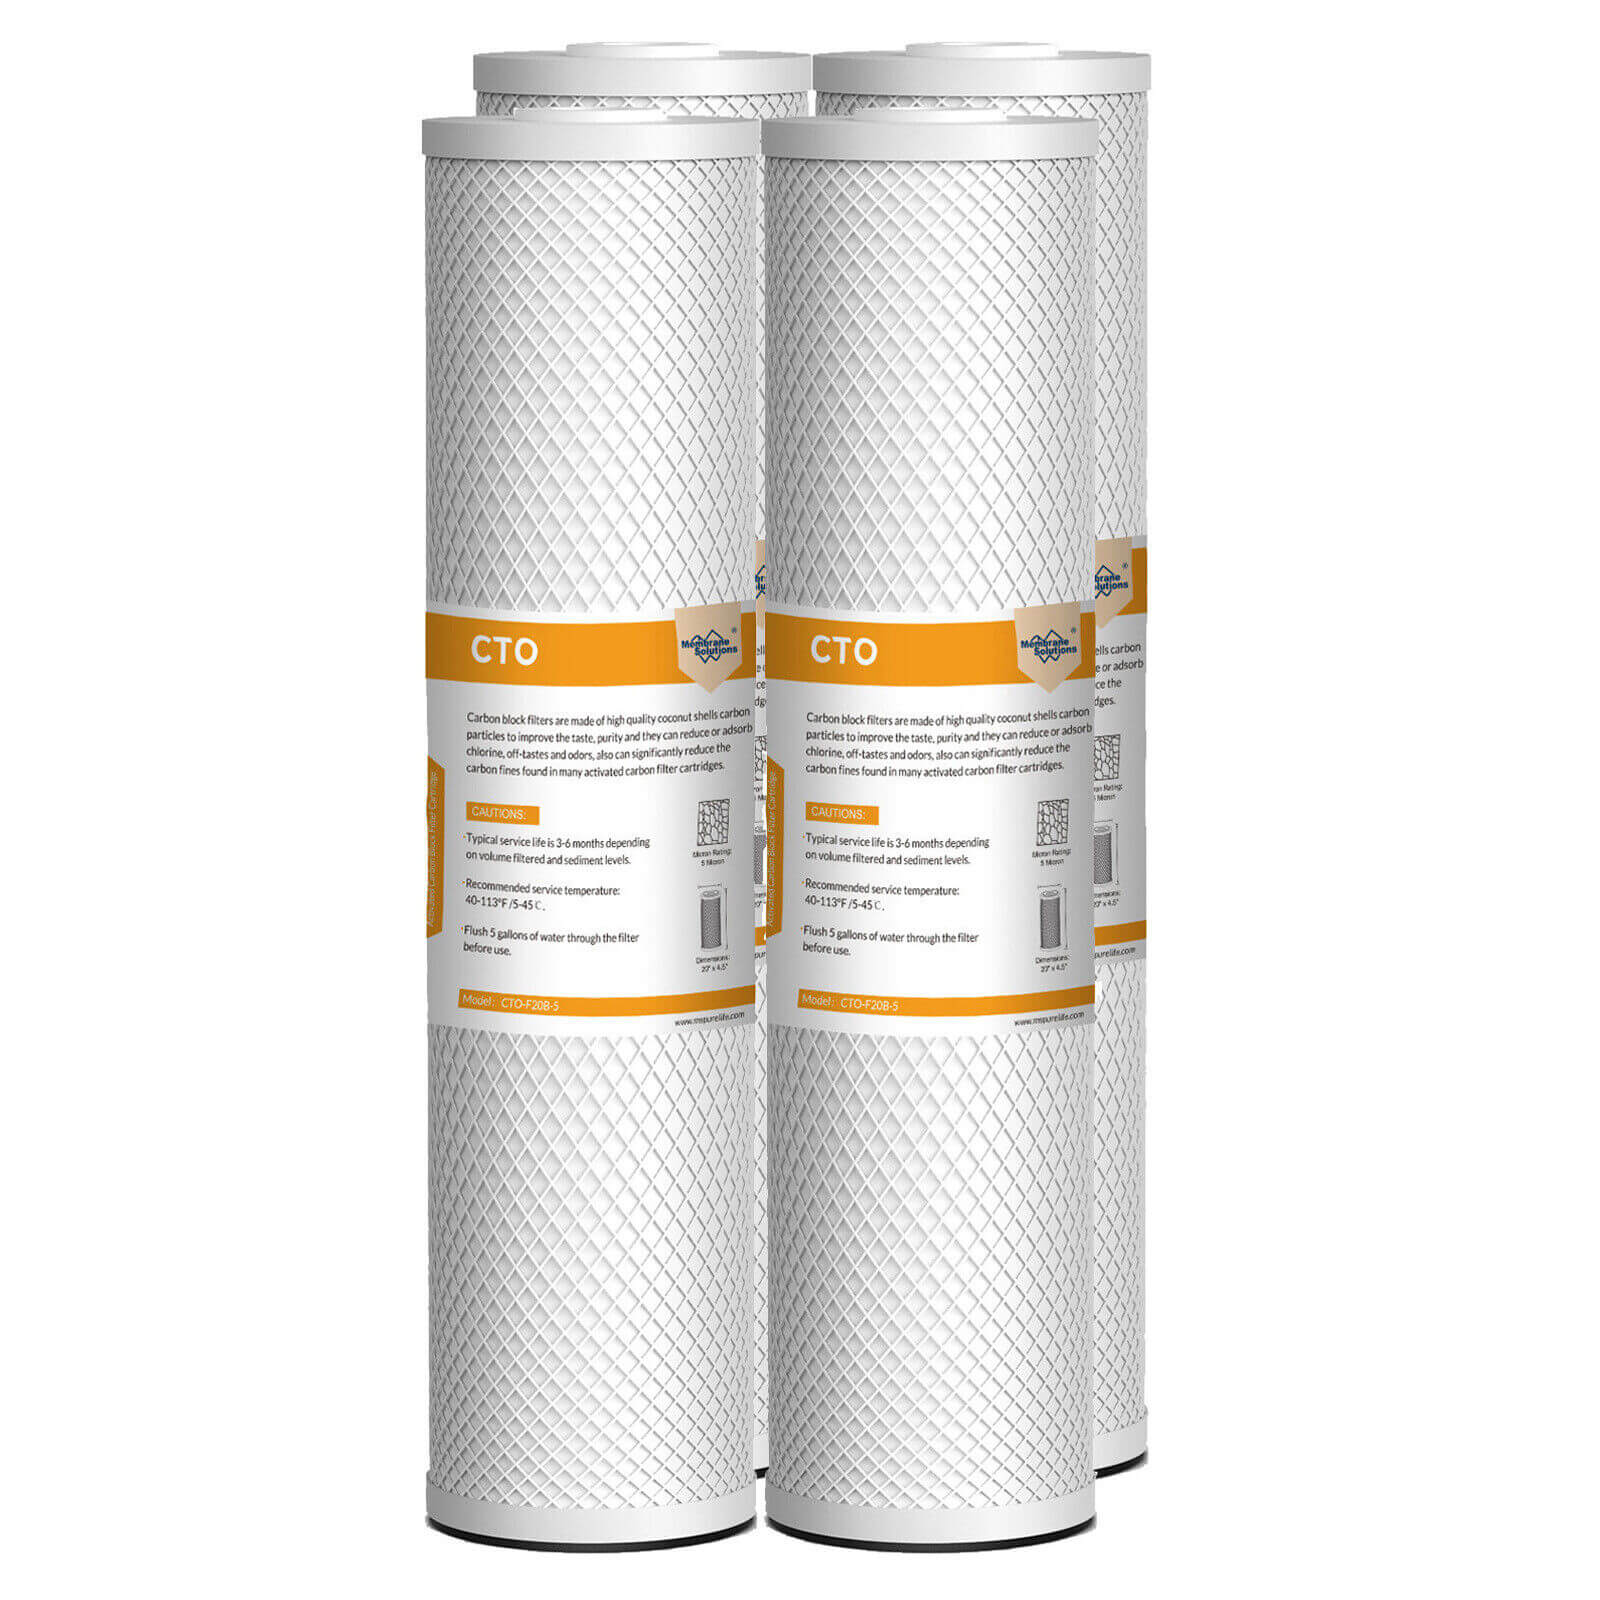 Membrane Solutions 20" x 4.5" 20 inch Coconut Shell Activated Carbon Block Filter Whole House Sediment Water Filter Cartridge Replacement